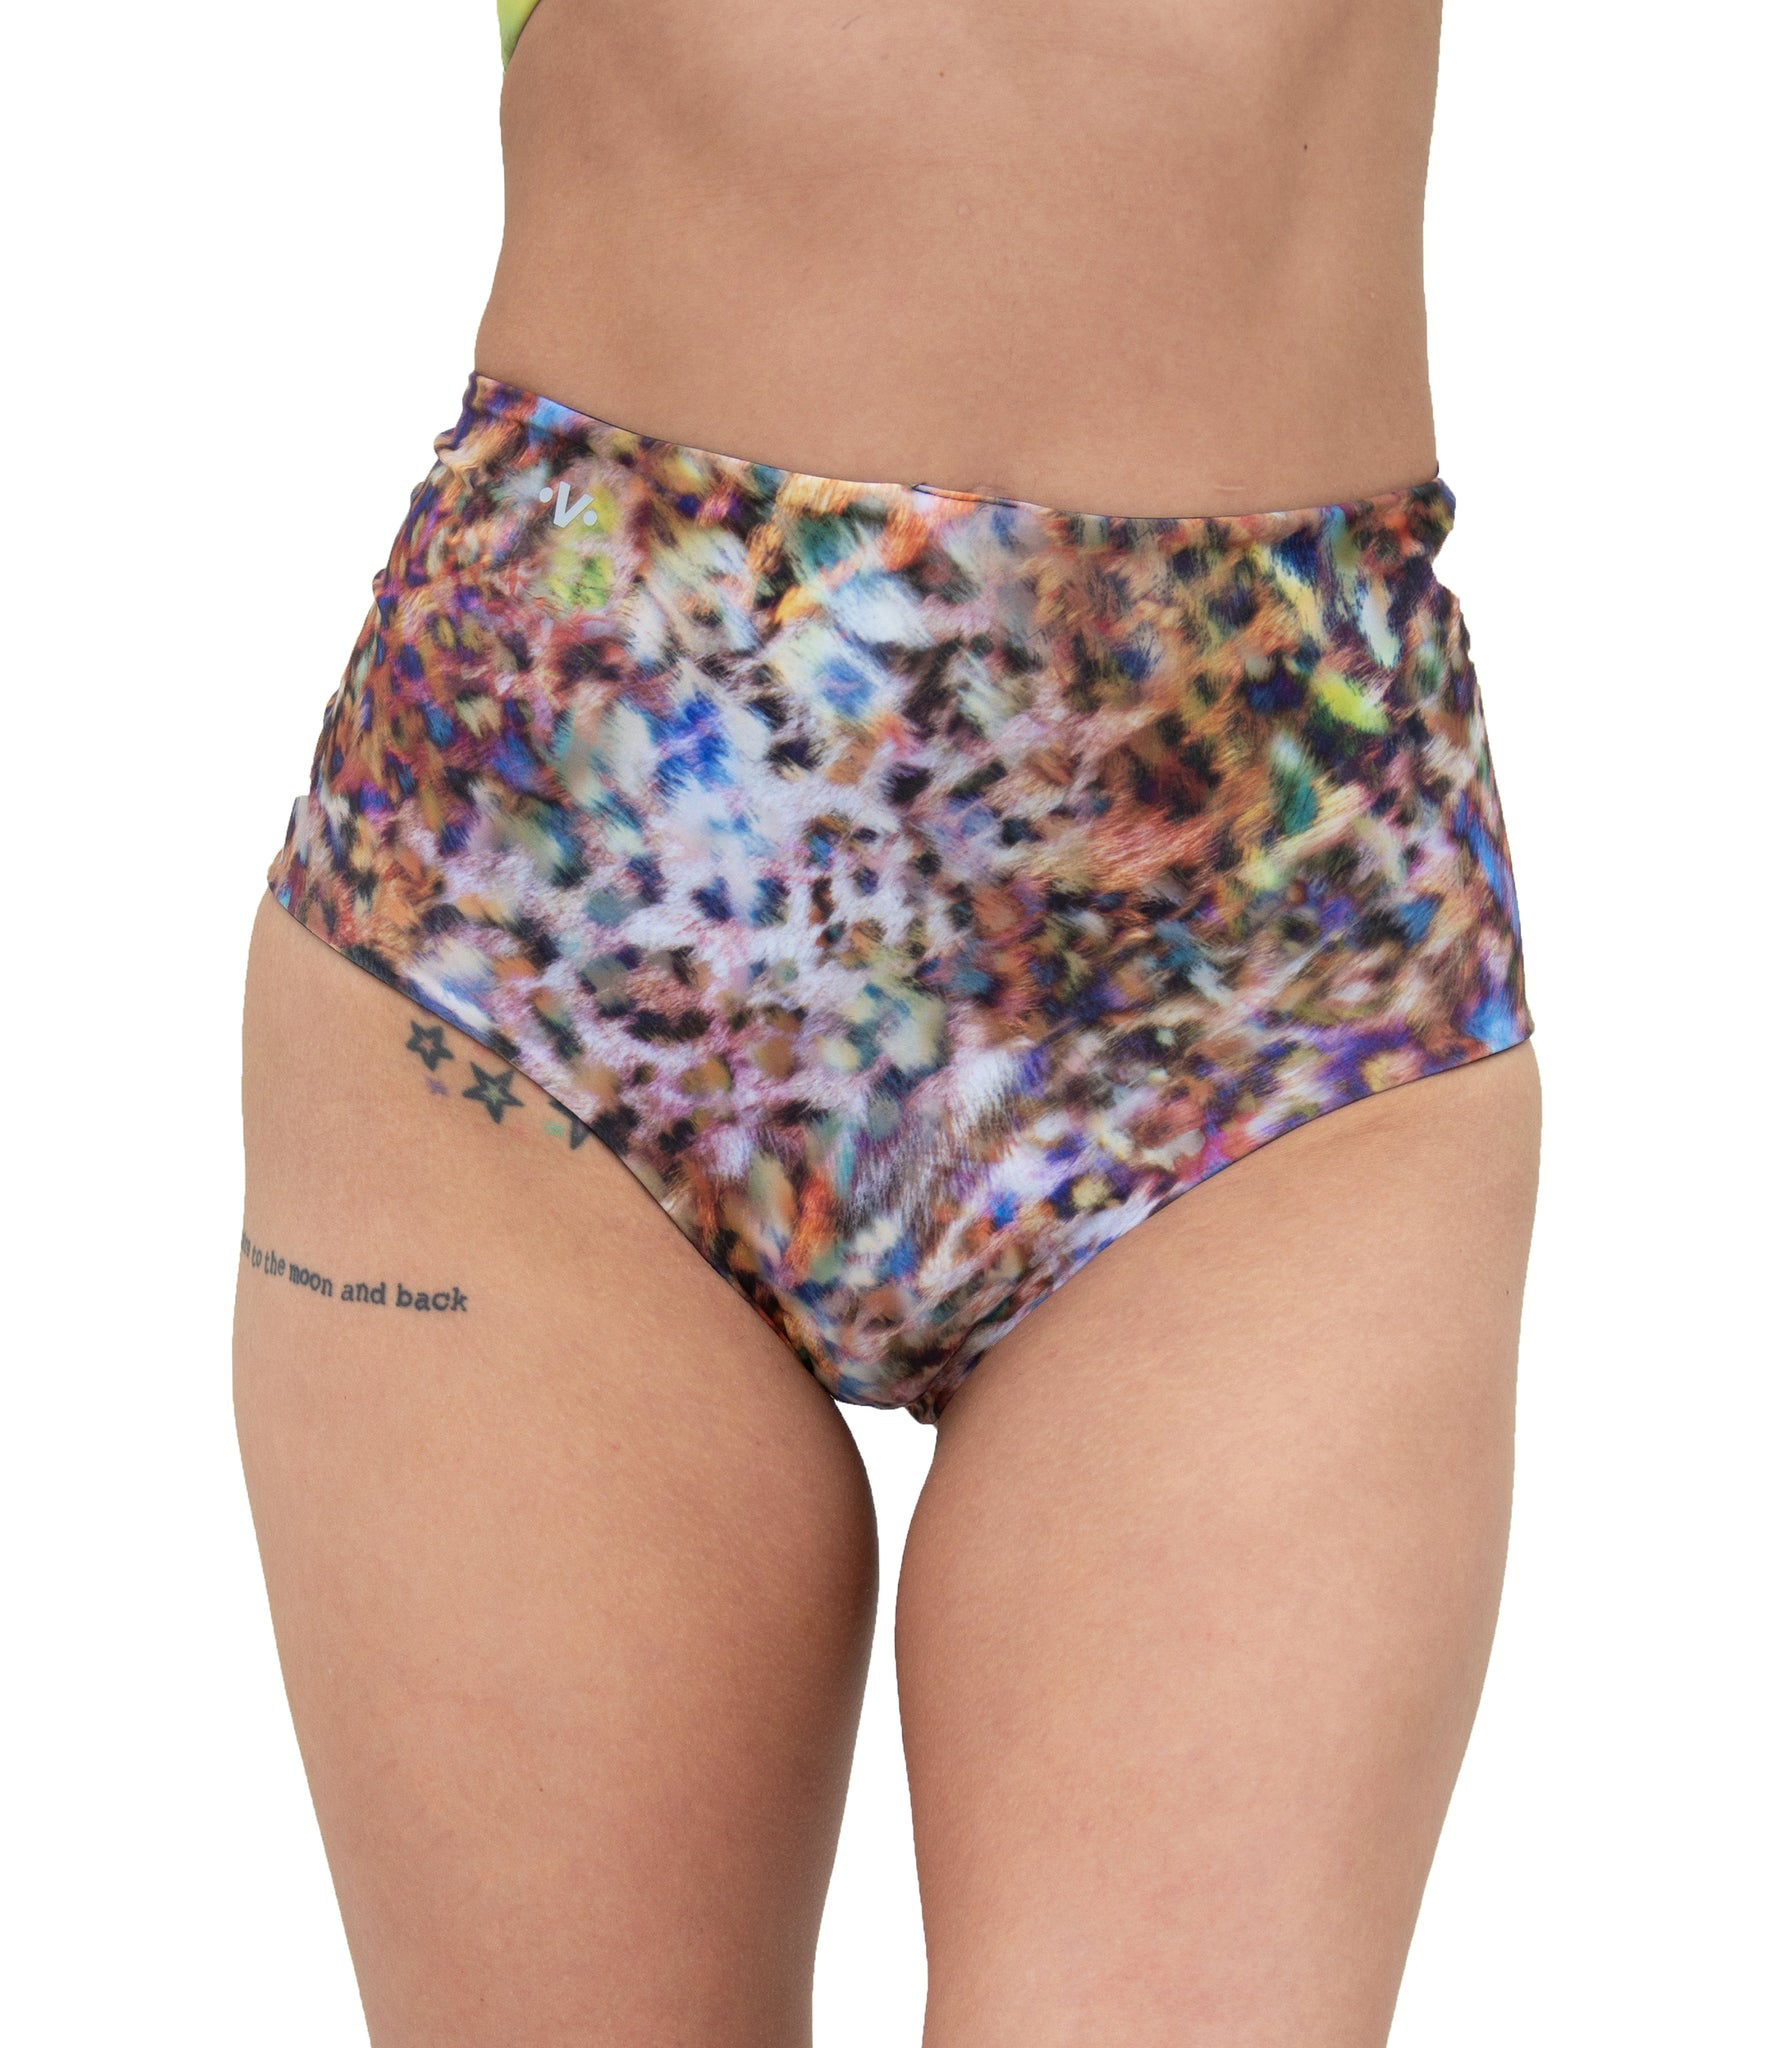 Hollywood High Waisted Short - Reversible Black & Colorful Kitty